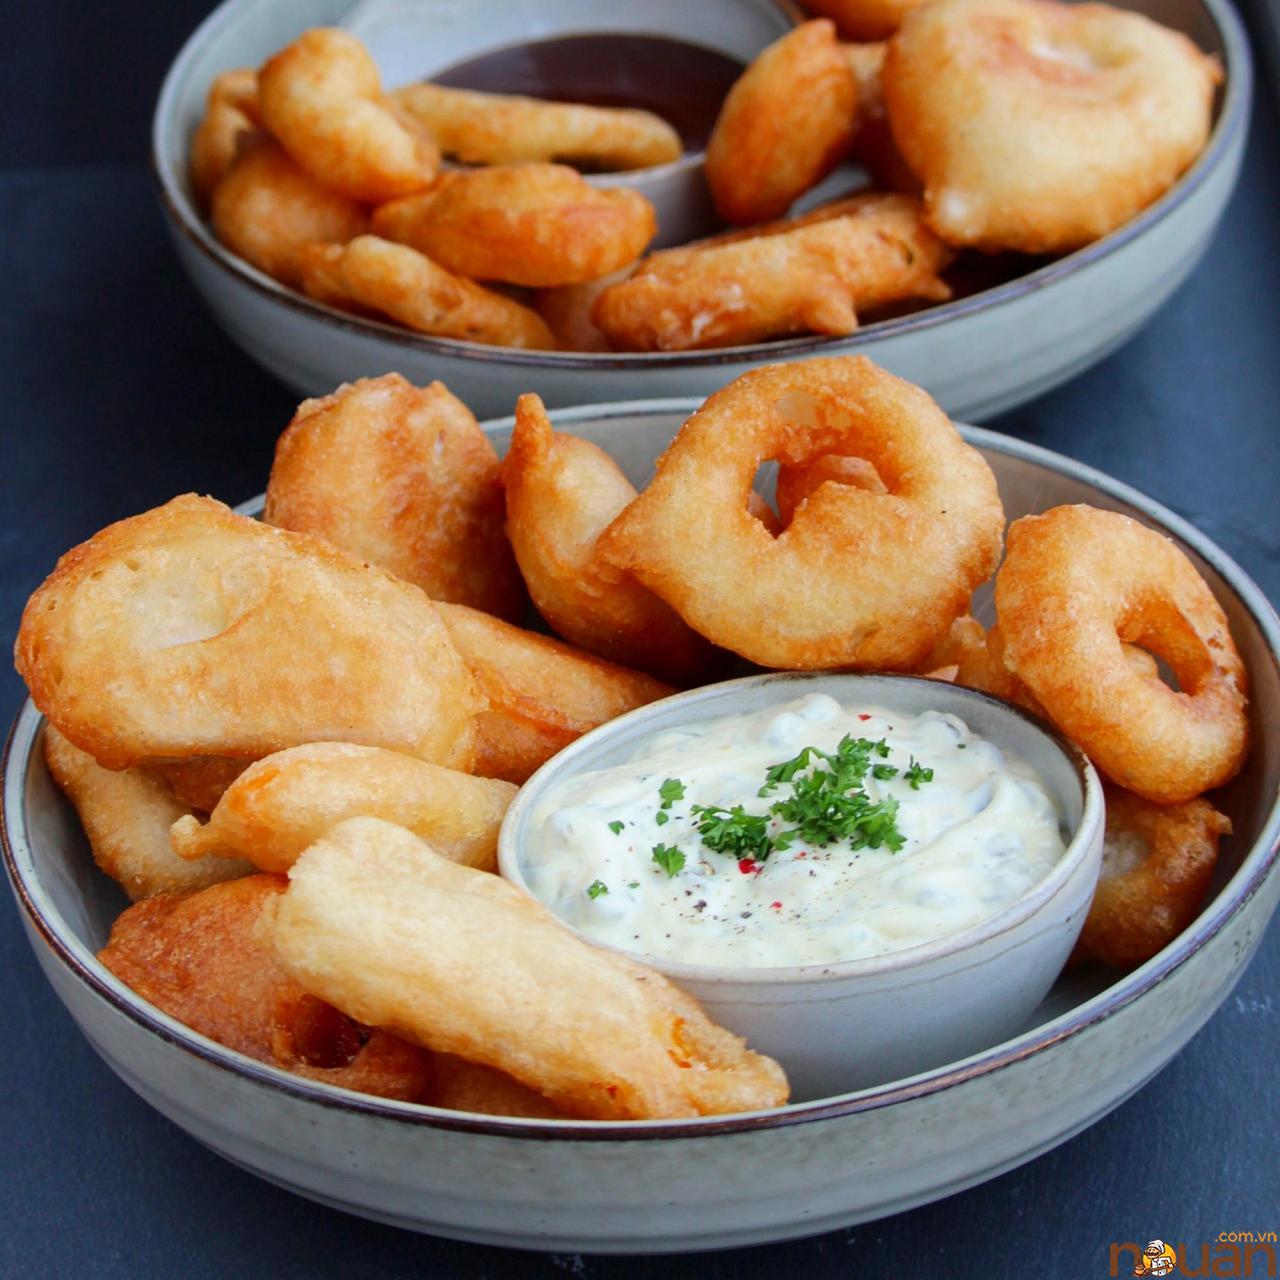 a bowl of crispy-looking beer-battered chicken and onion rings surrounding a ramekin of tartar sauce garnished with chopped parsley